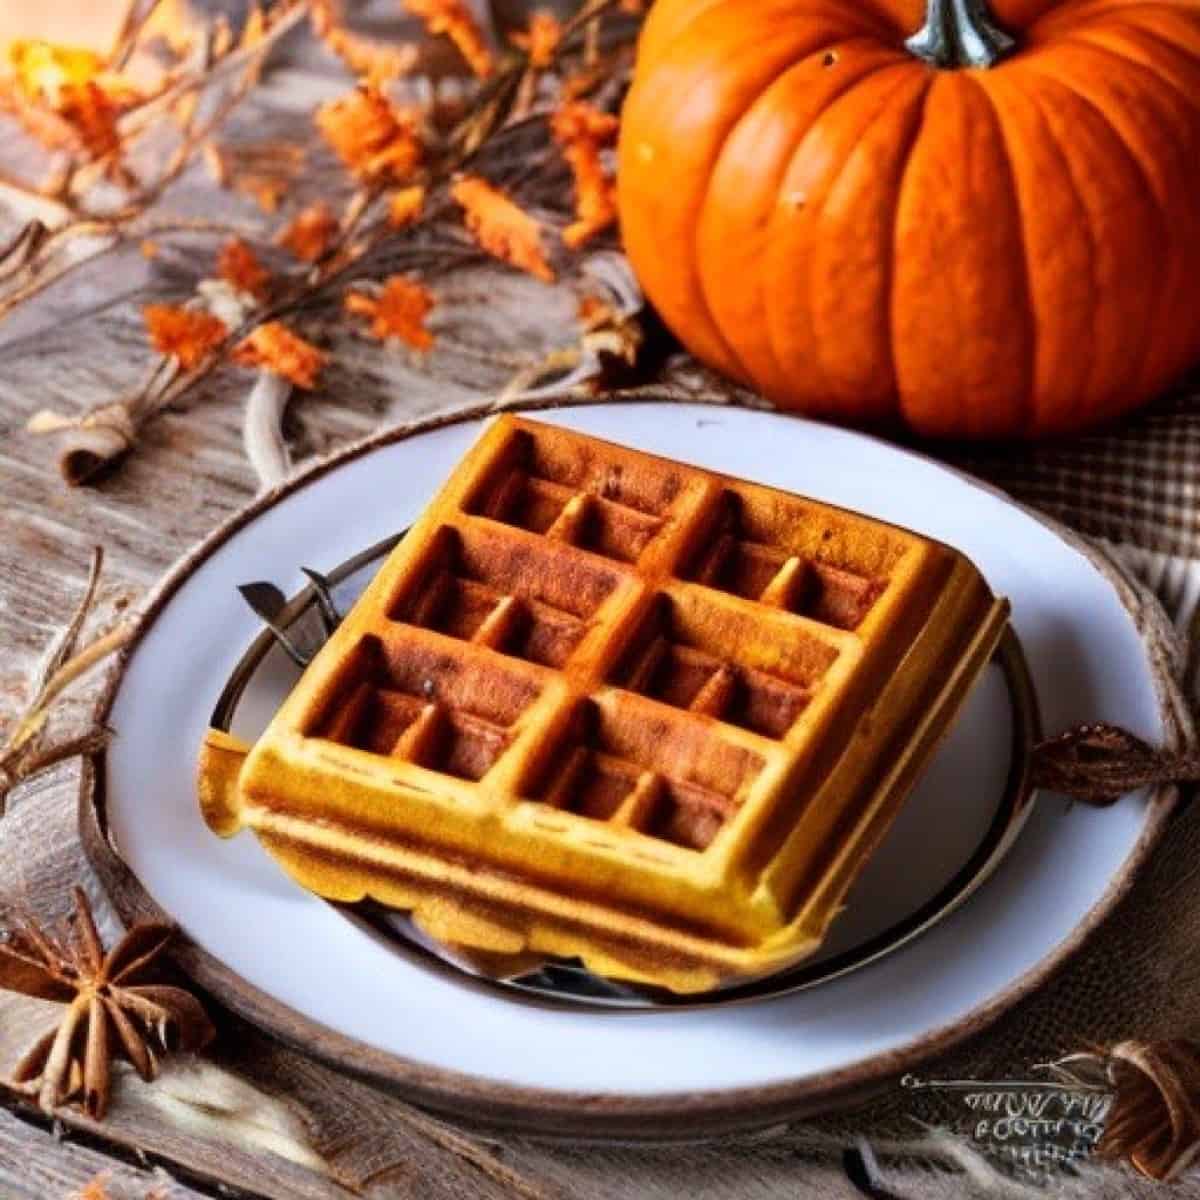 A close-up photo of a golden brown pumpkin spice waffle on a plate. The waffle is topped with maple syrup and a sprinkle of pumpkin pie spice. The background is blurred, and there is a warm, inviting glow to the image.